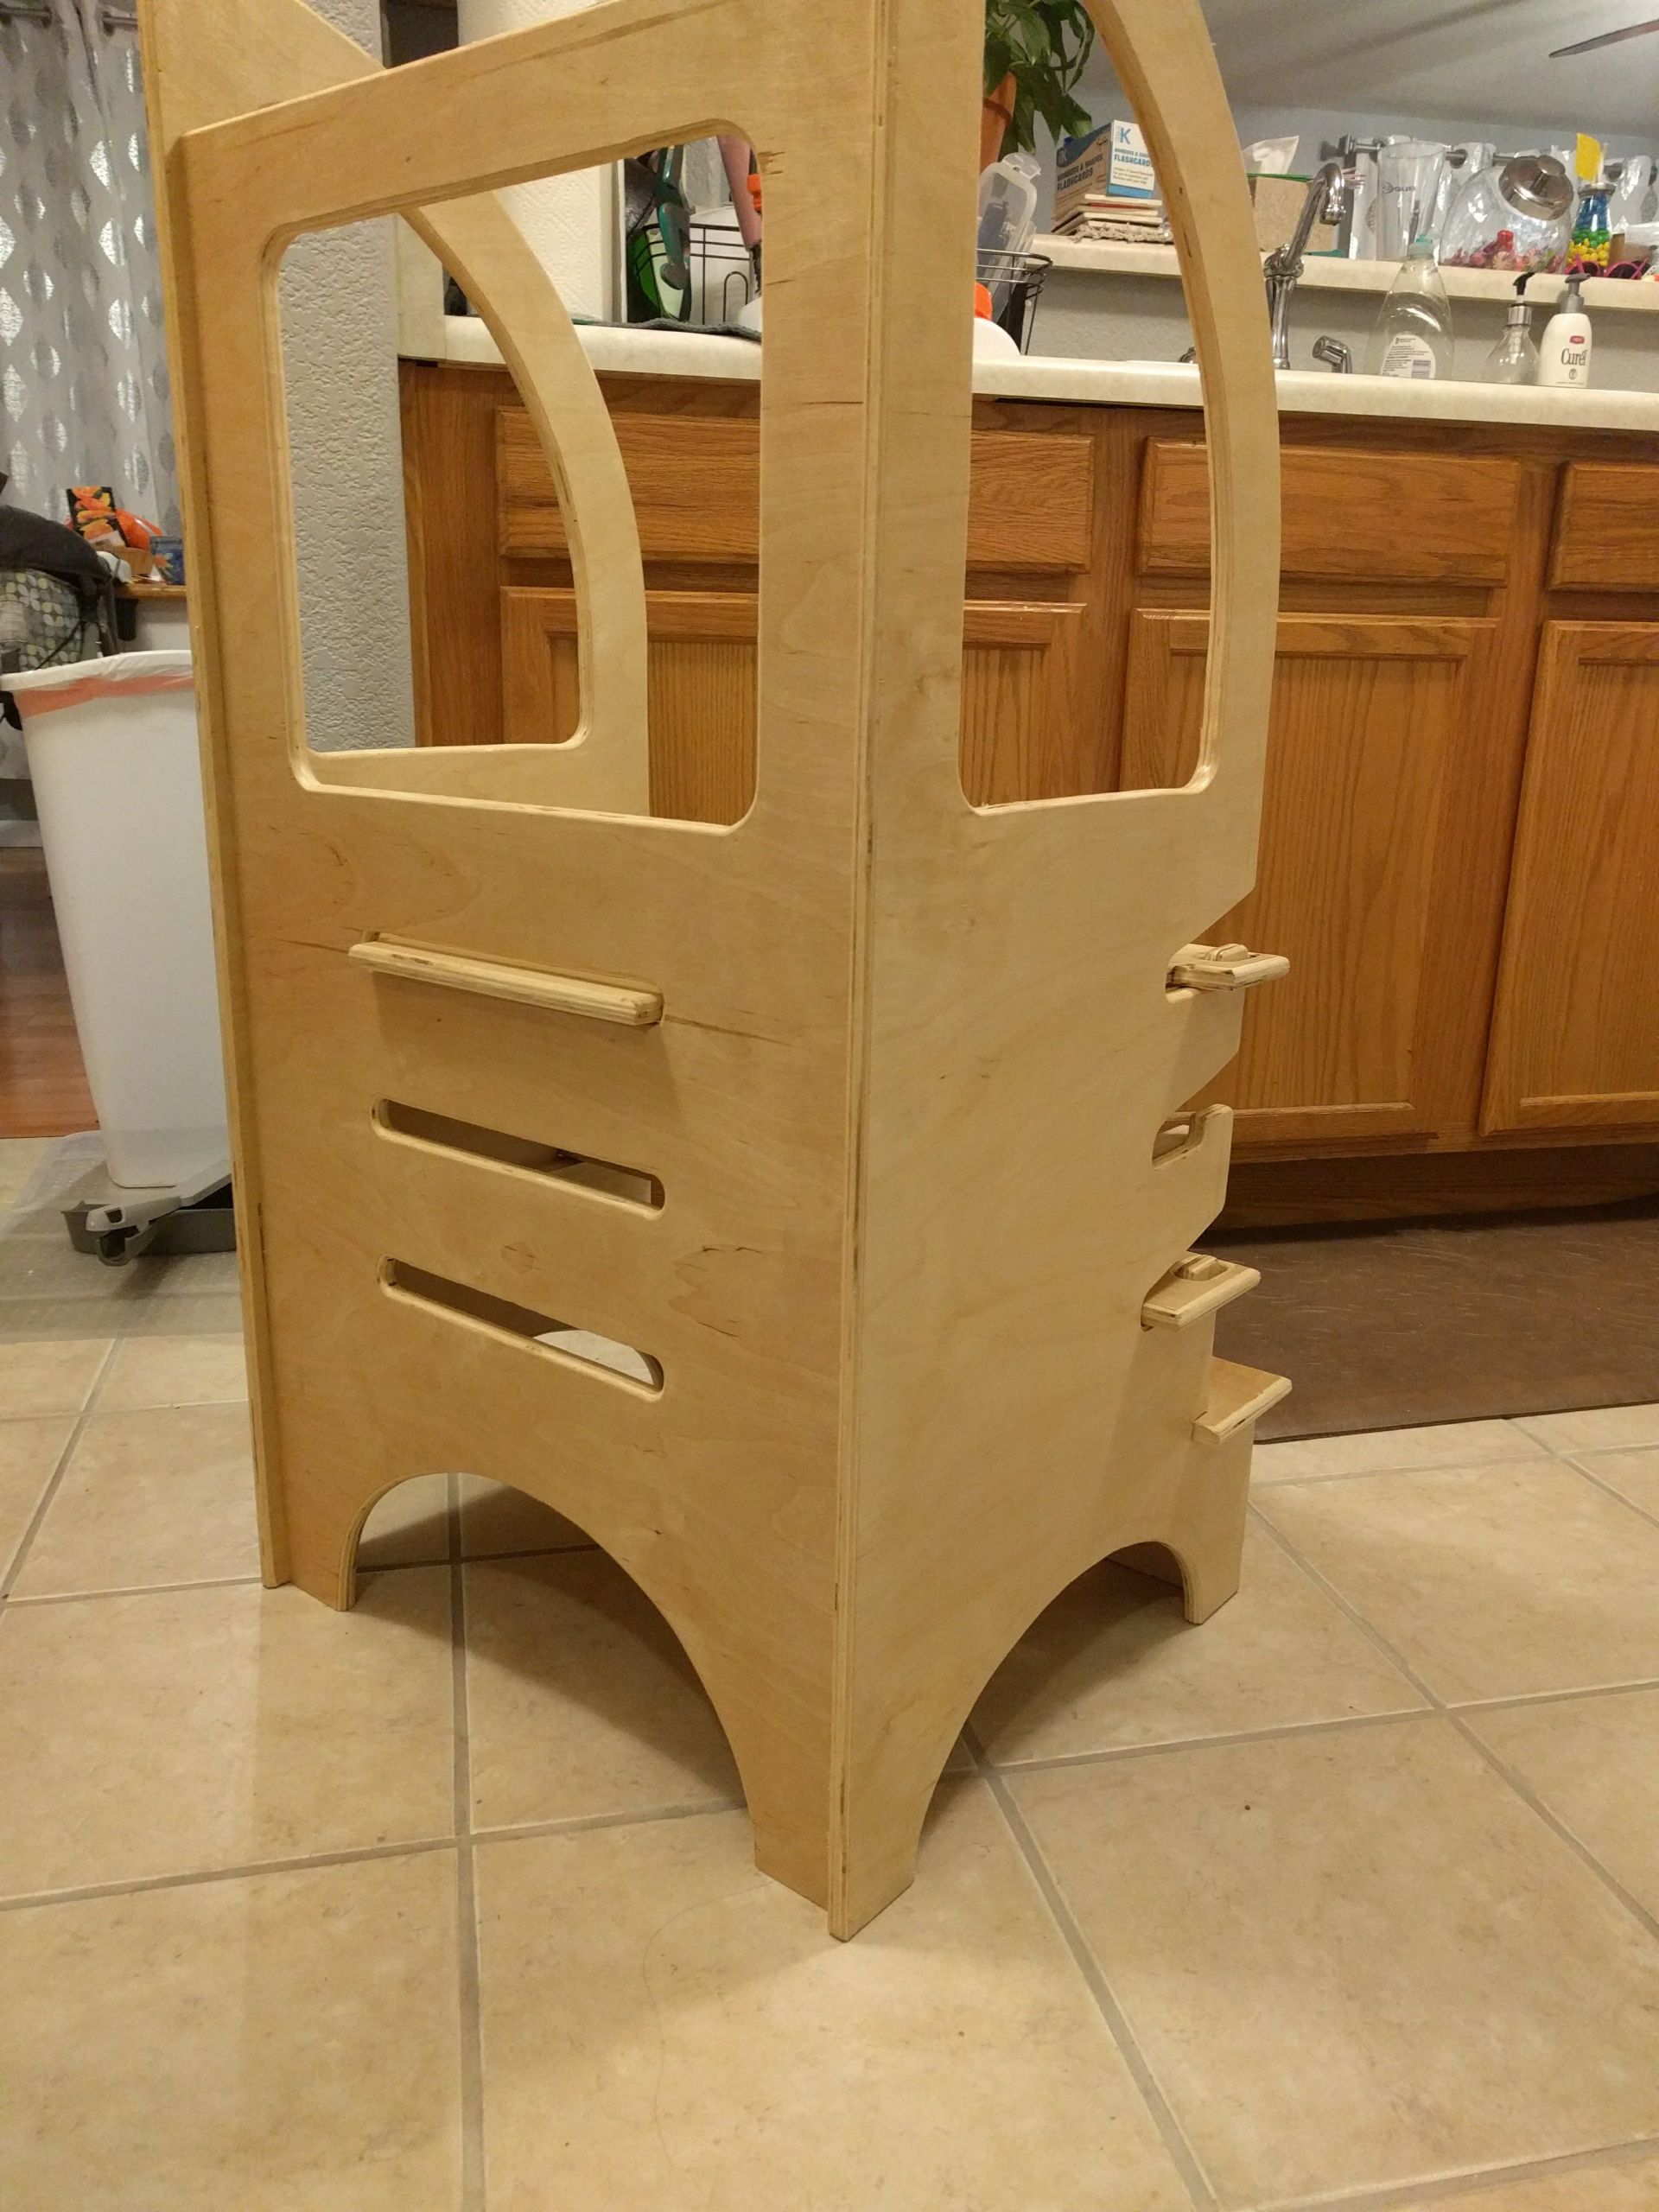 DIY Toddler Step Stool
 Adjustable height Toddler Step Stool made from plywood